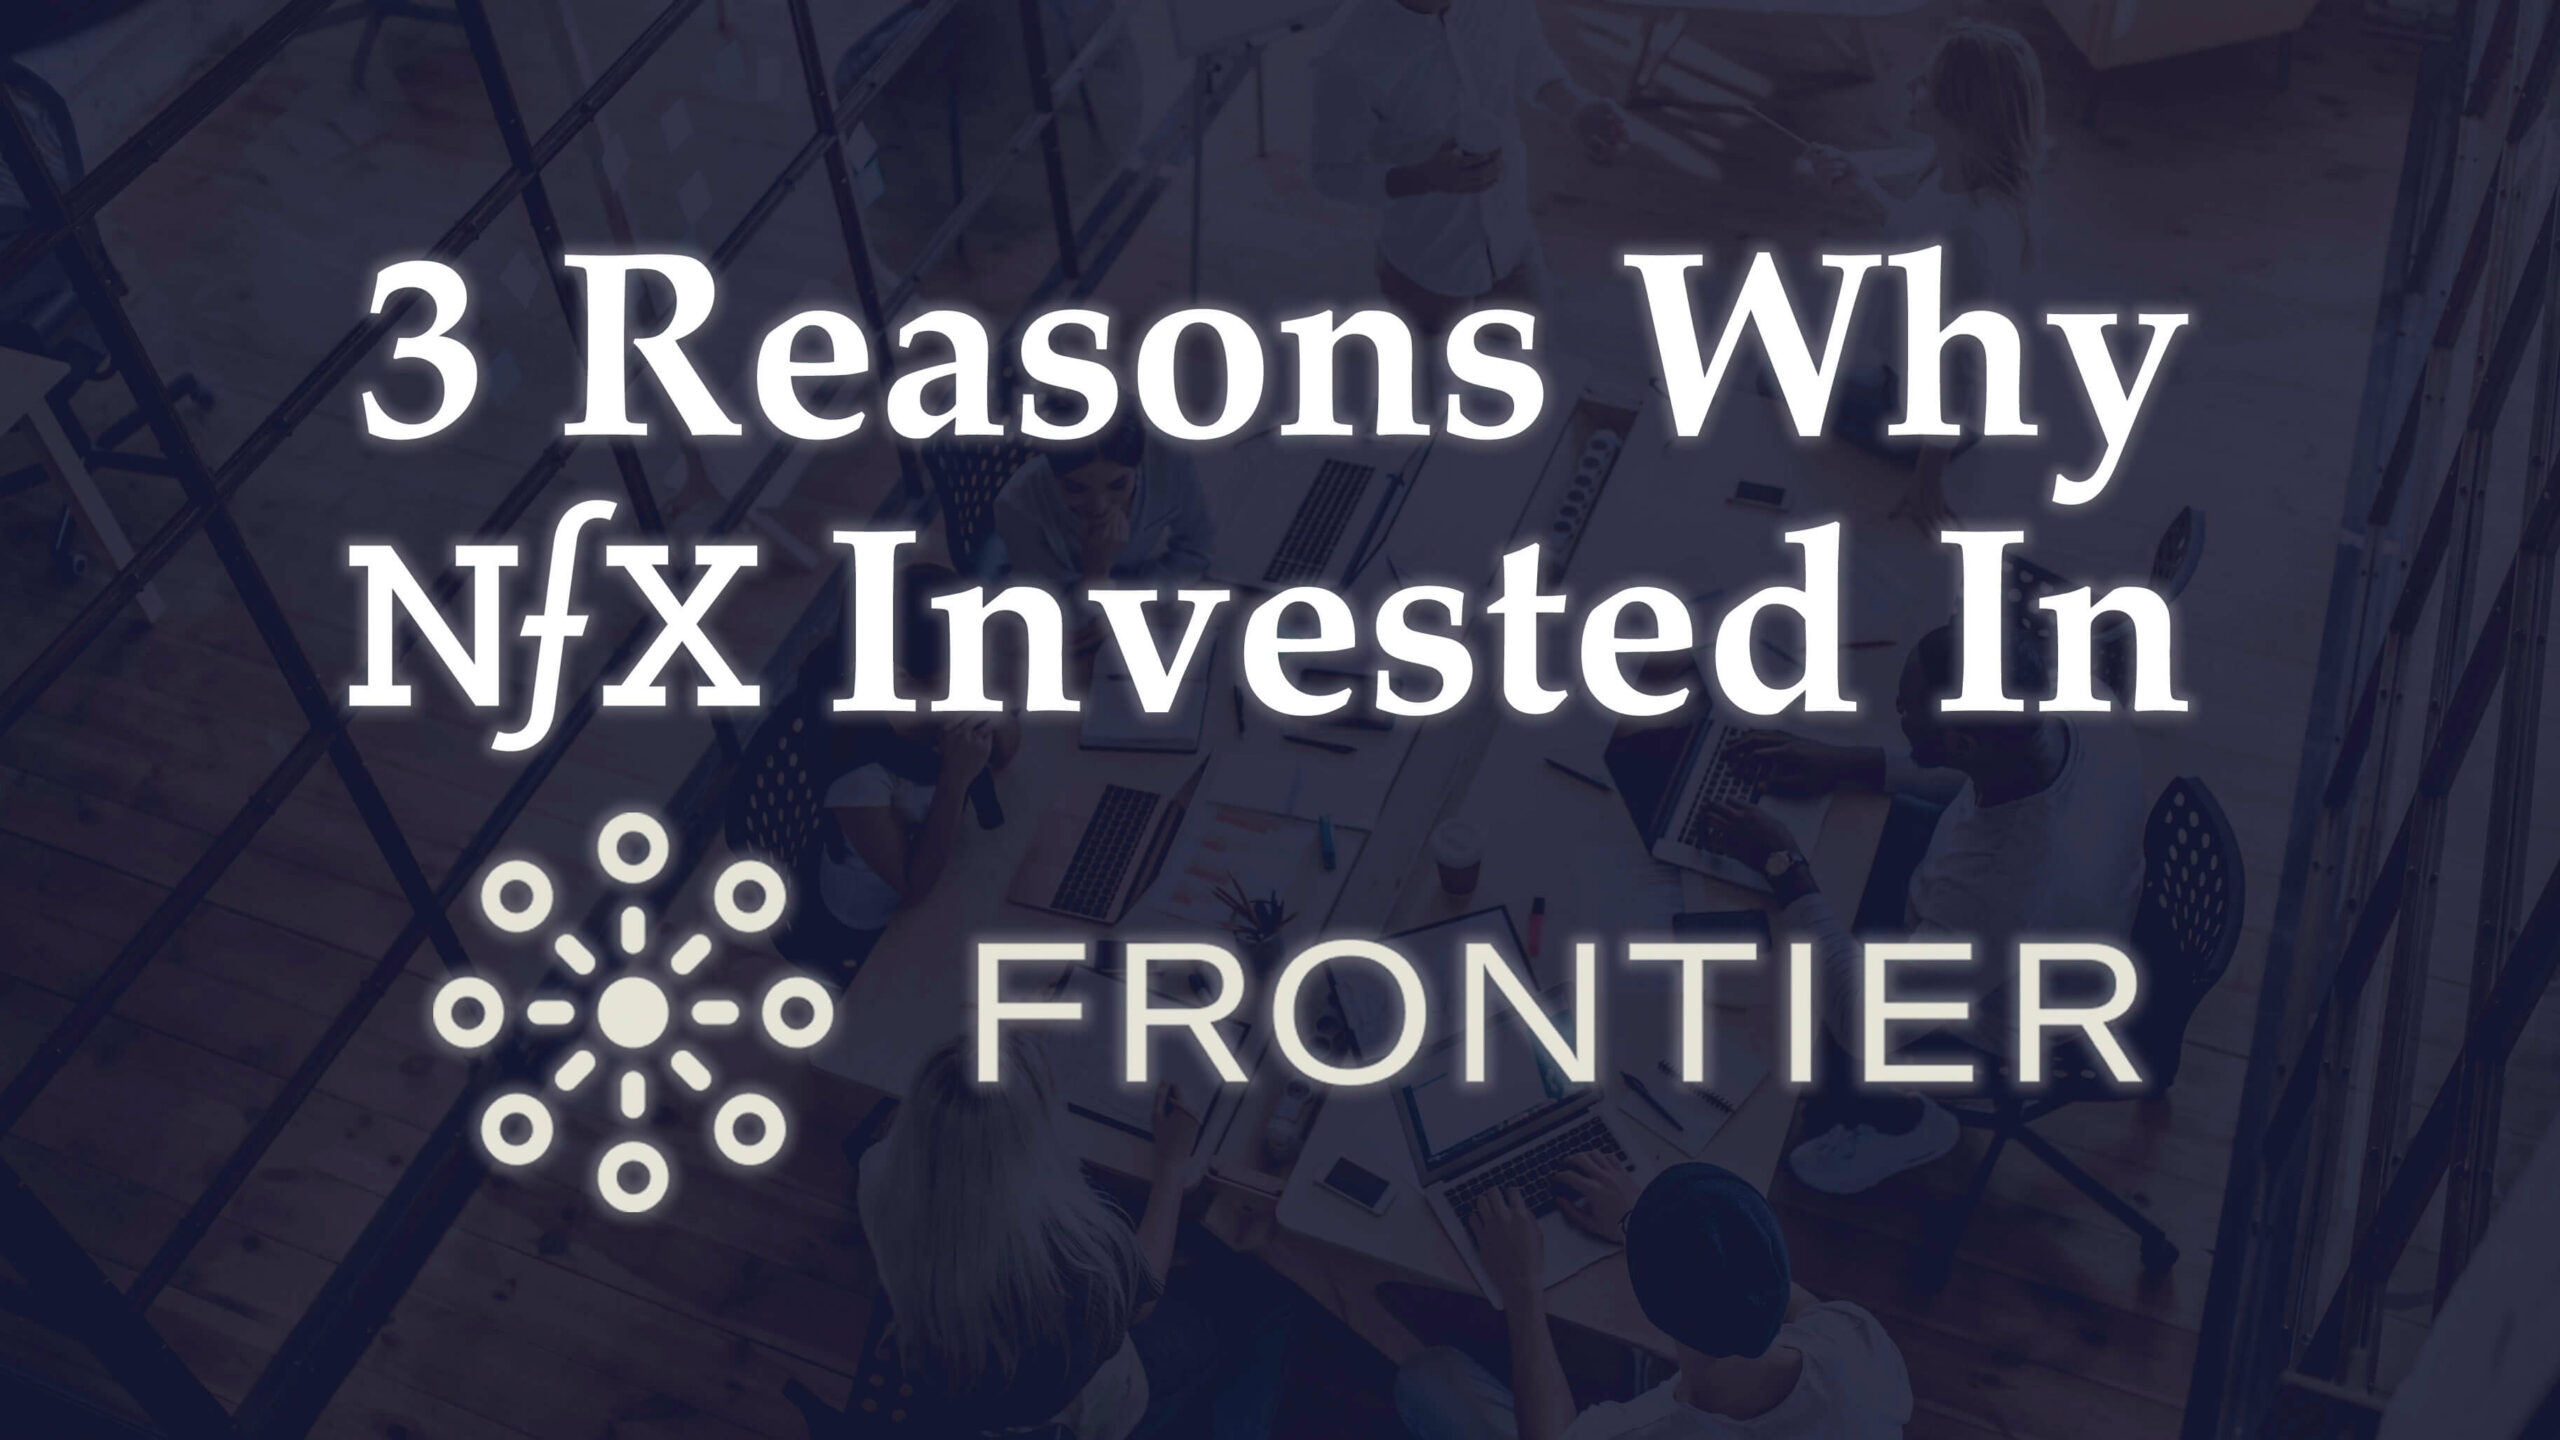 Why NFX Invested In Frontier